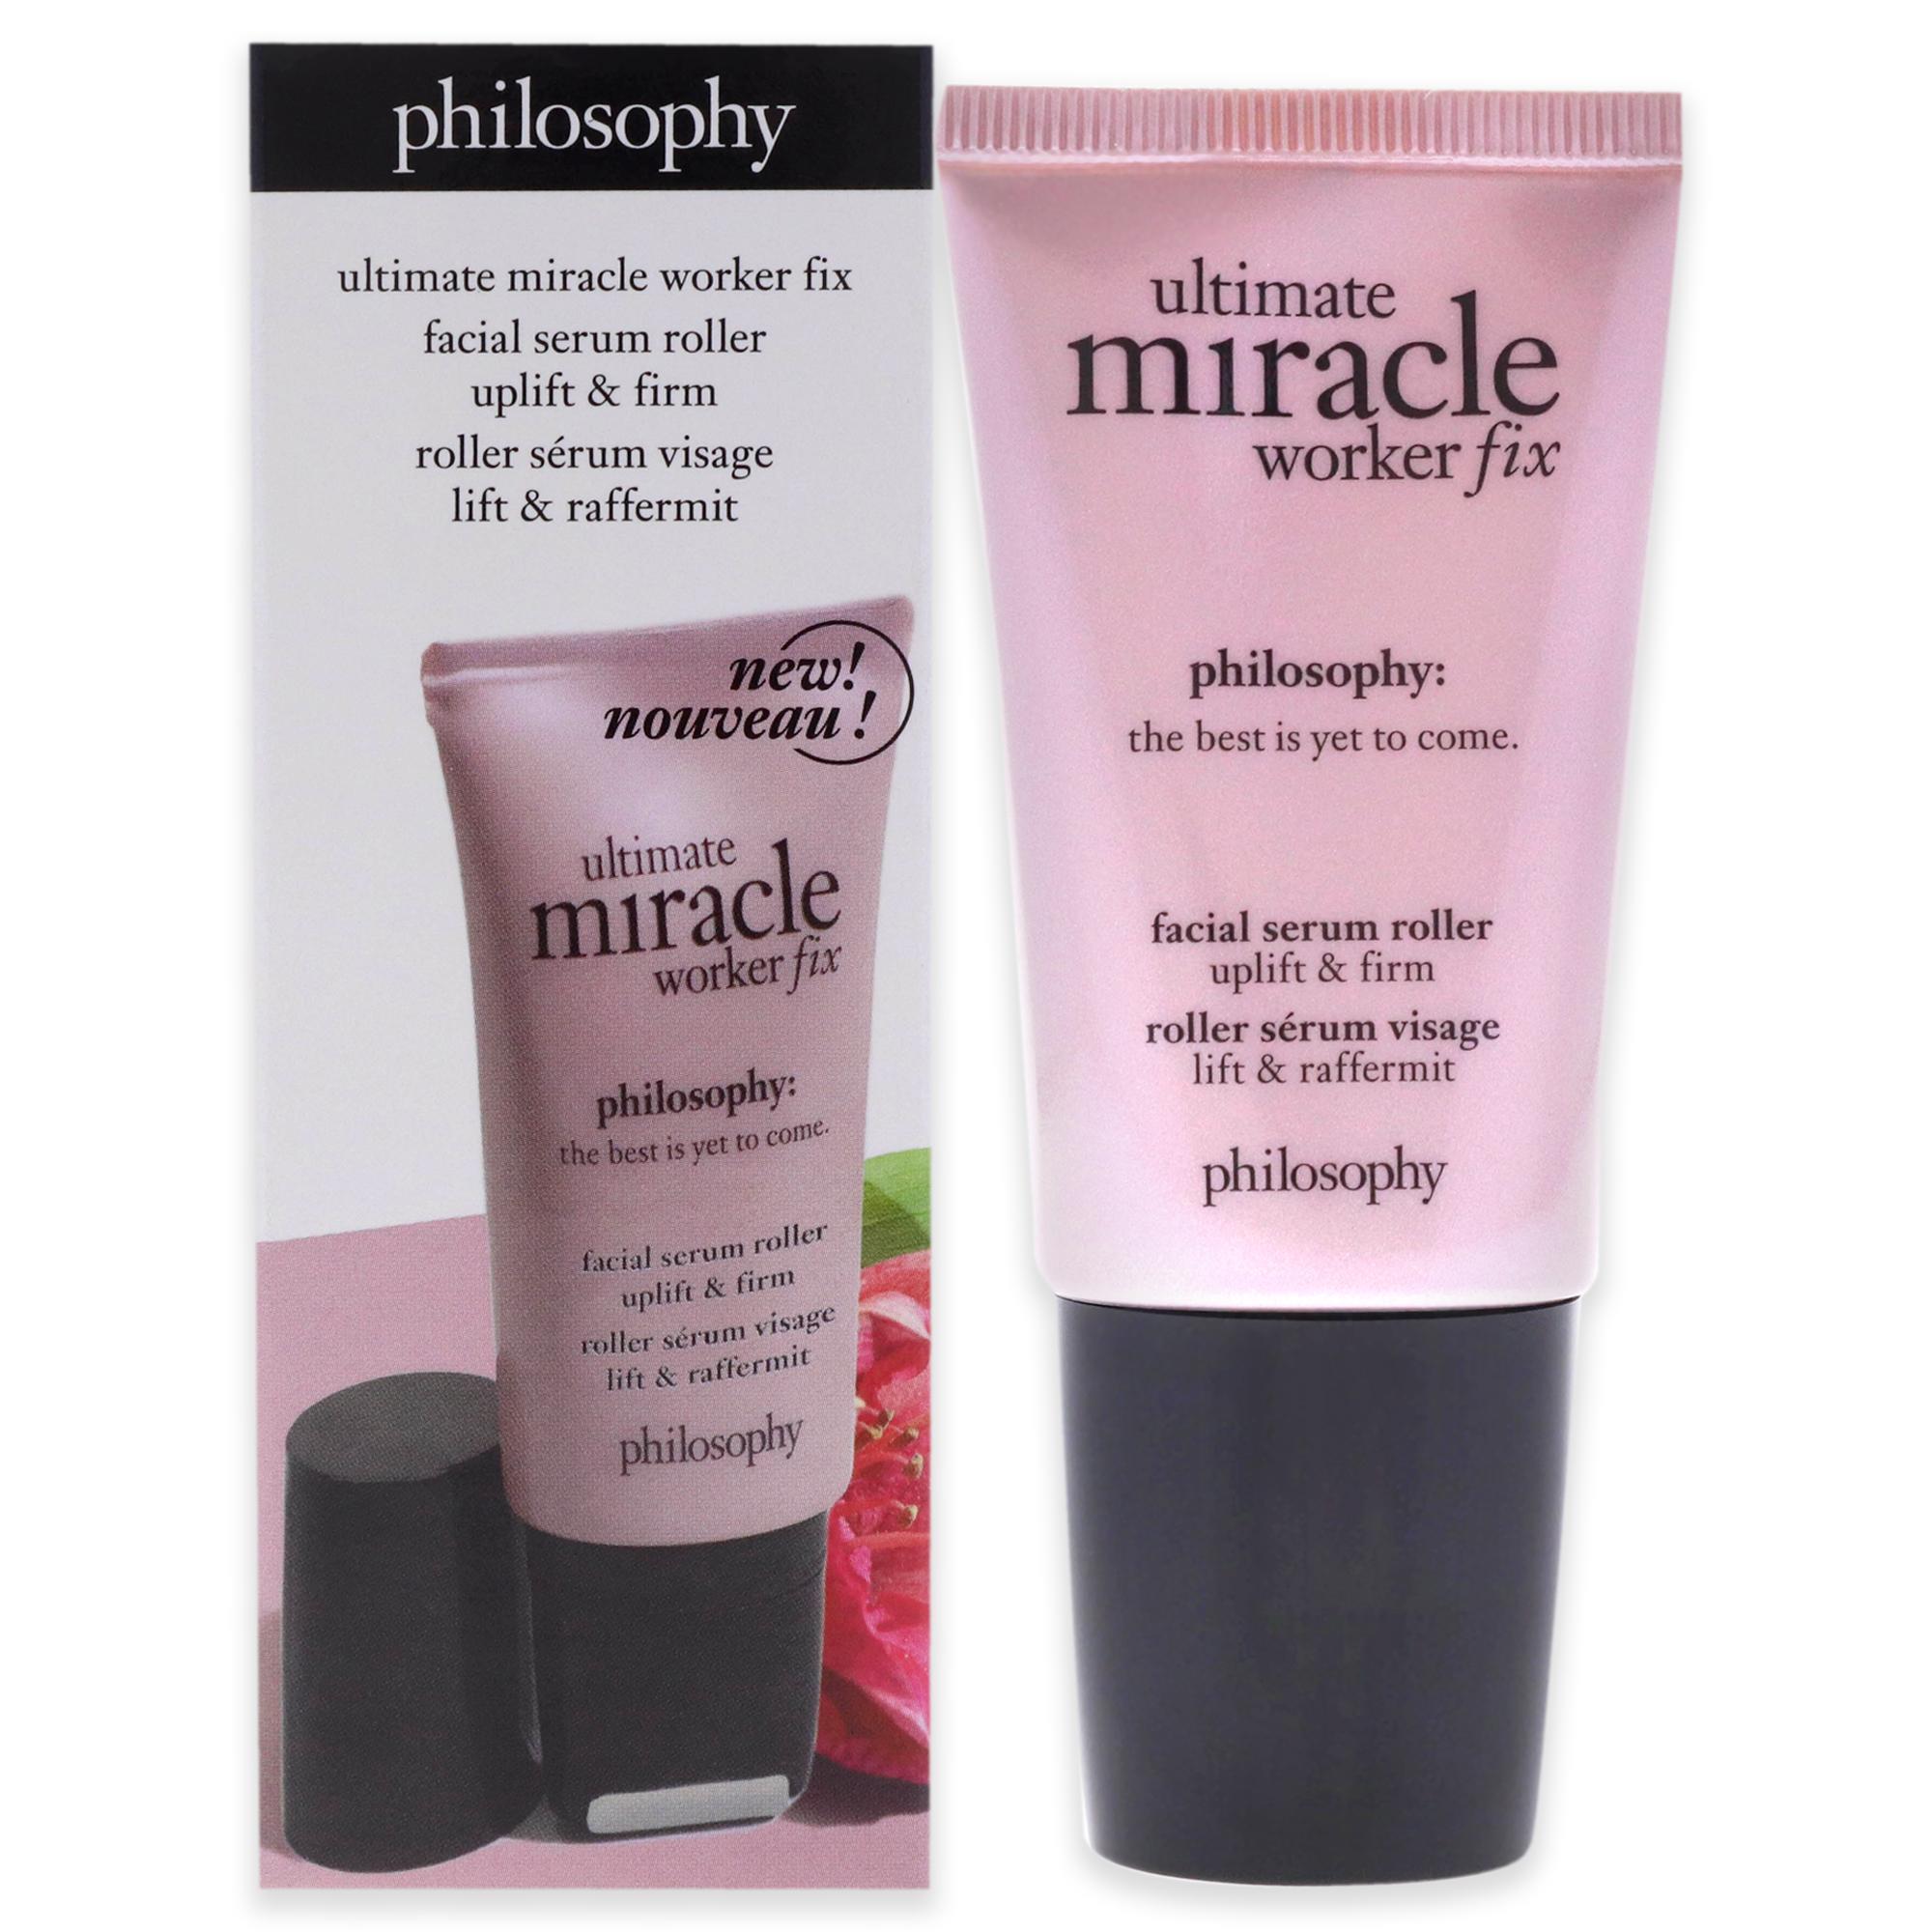 Ultimate Miracle Worker Fix Facial Serum Roller by Philosophy for Unisex - 1 oz Serum